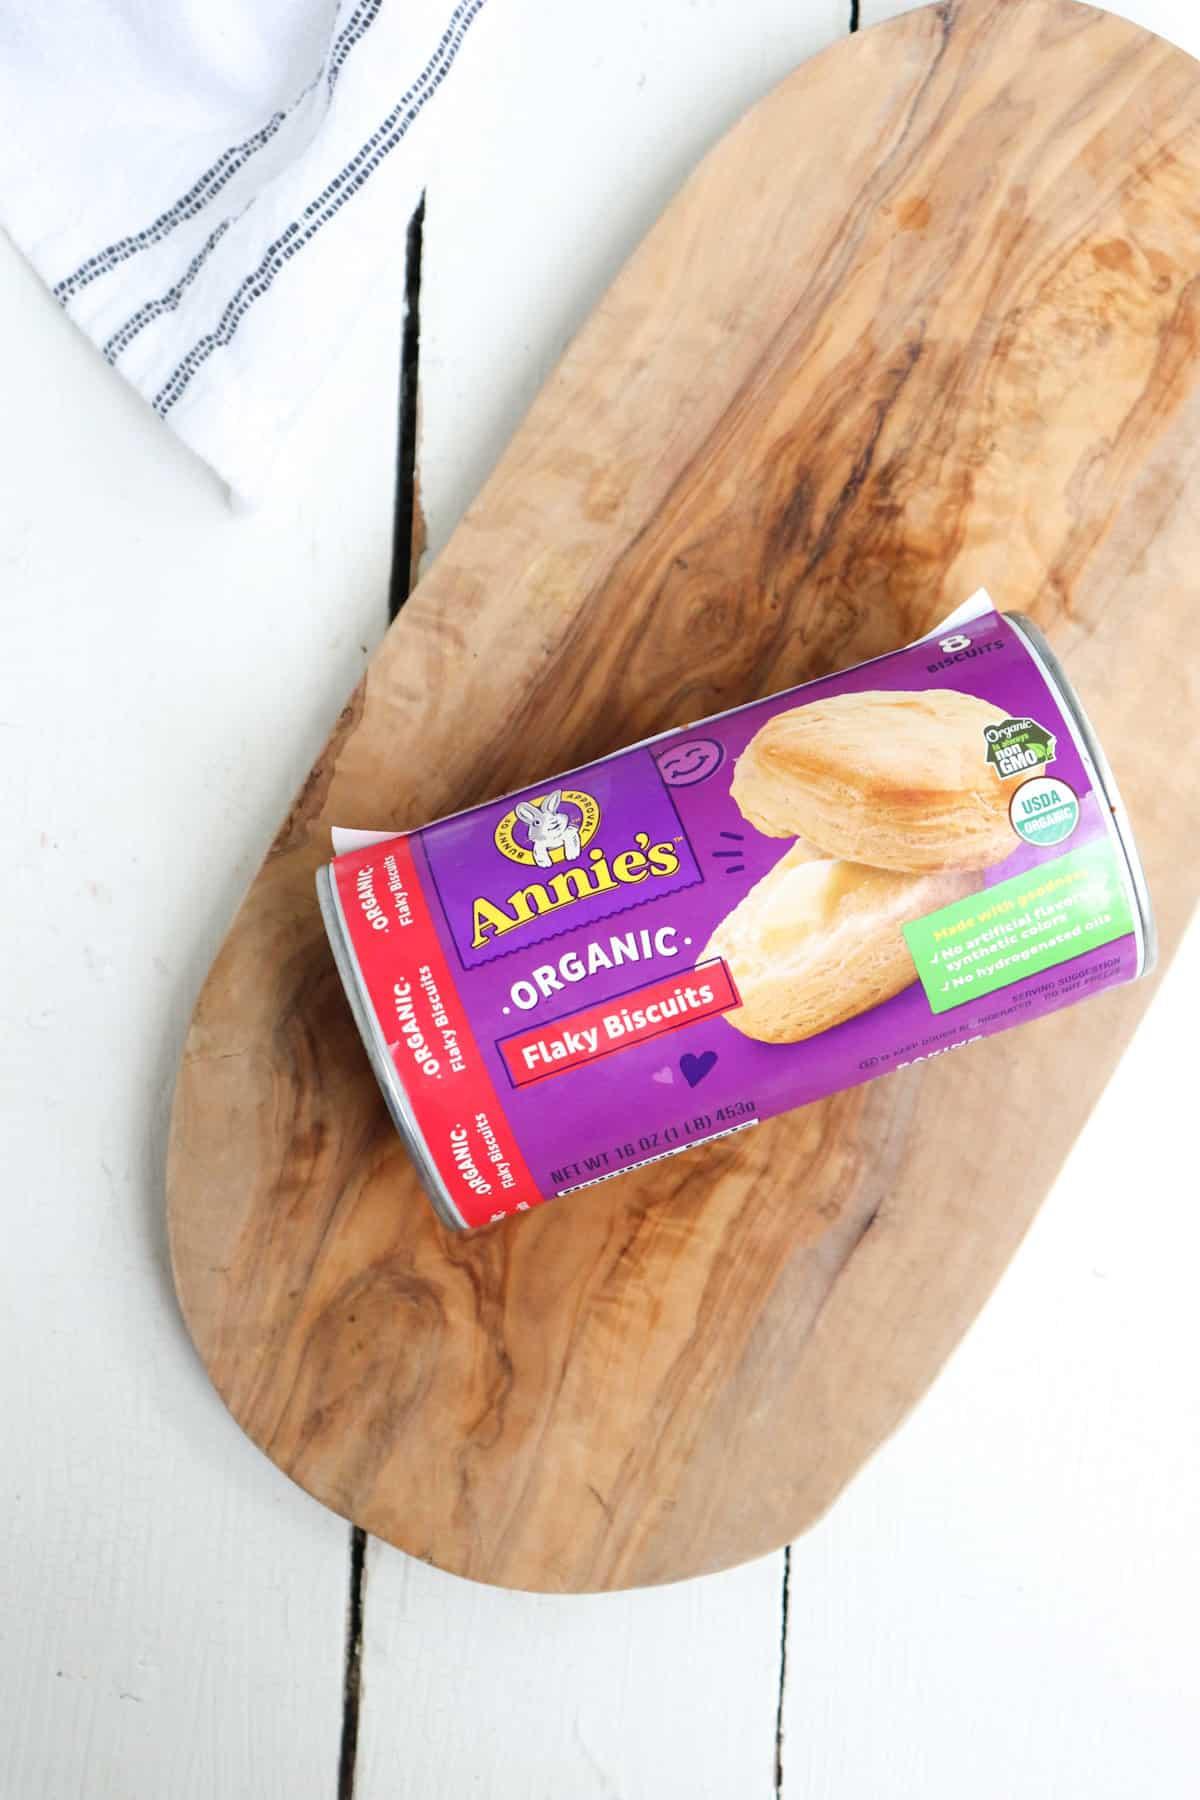 can of annies refrigerator biscuits on a wooden board.